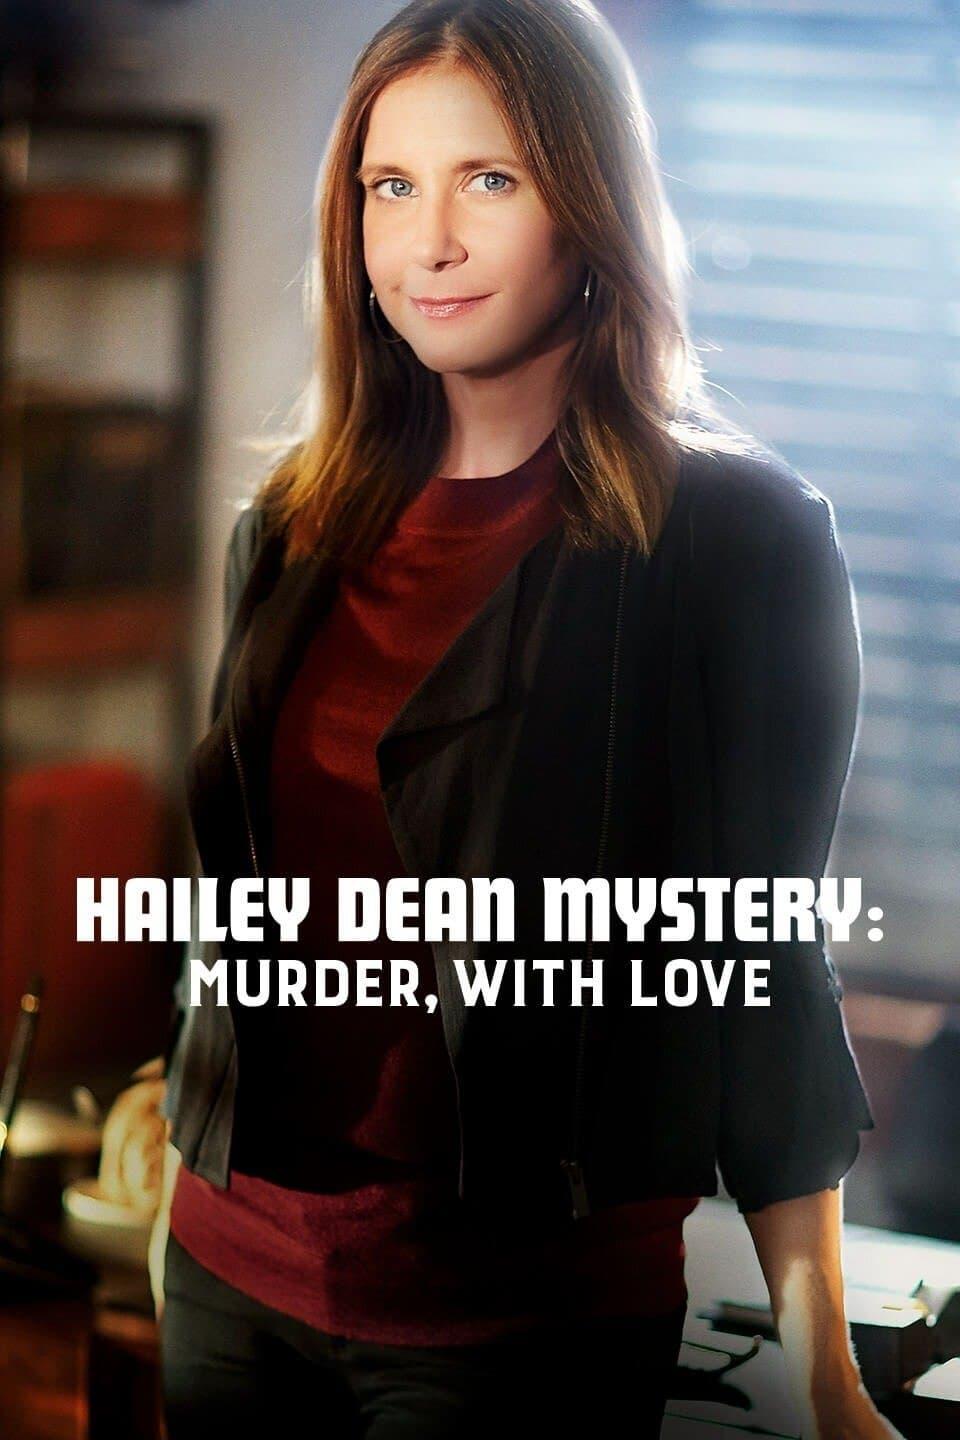 Hailey Dean Mysteries: Murder, With Love poster